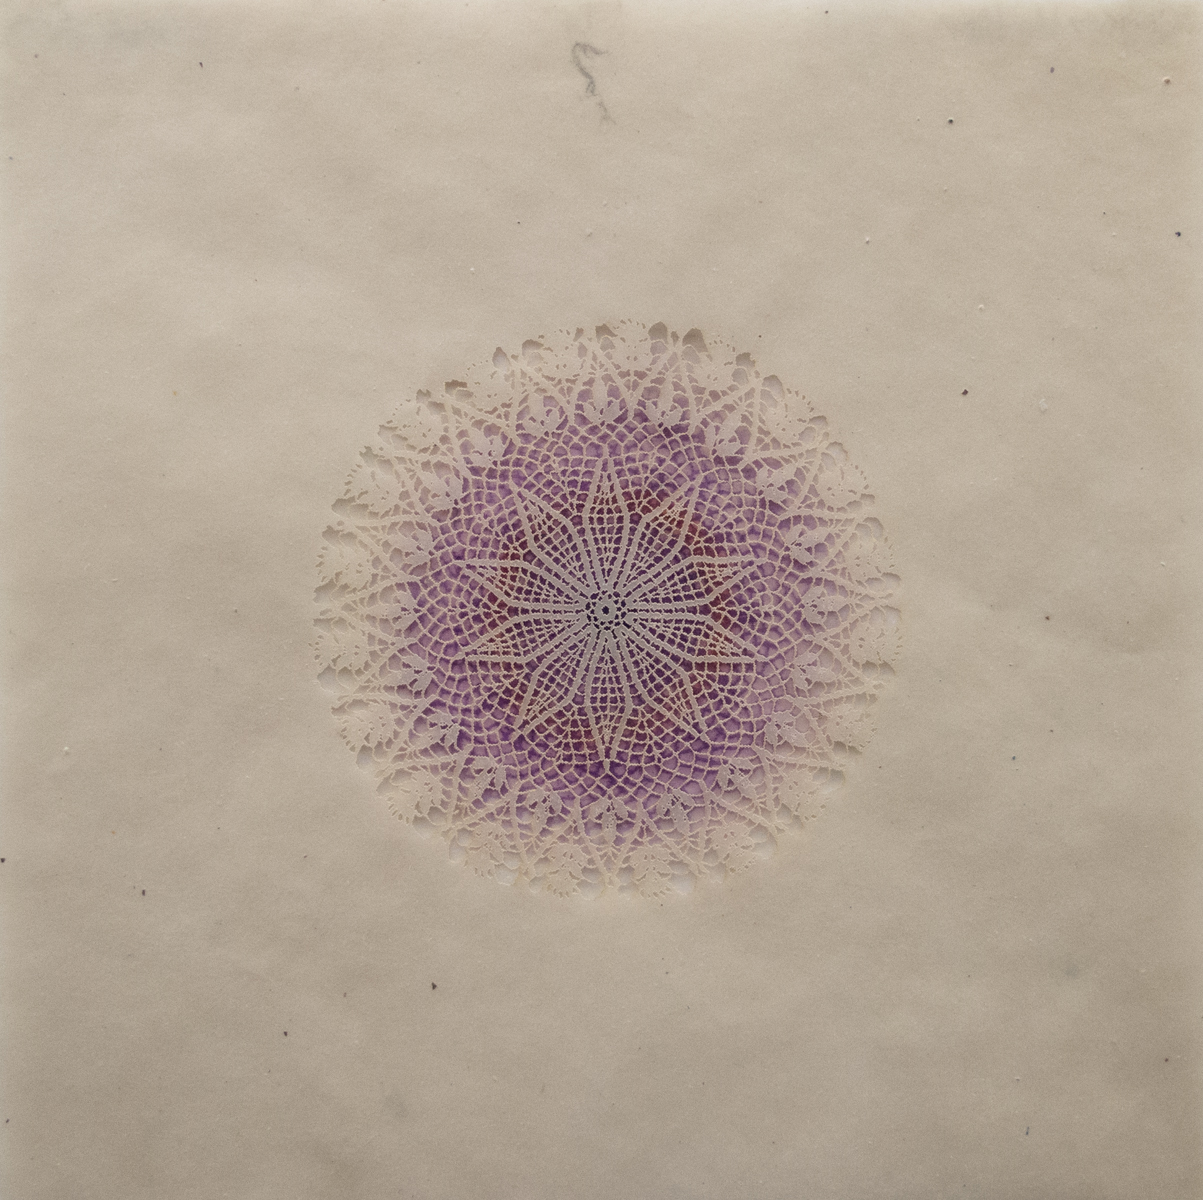  Amy Sands   Constellation III   Monotype with screenprint and lasercut 